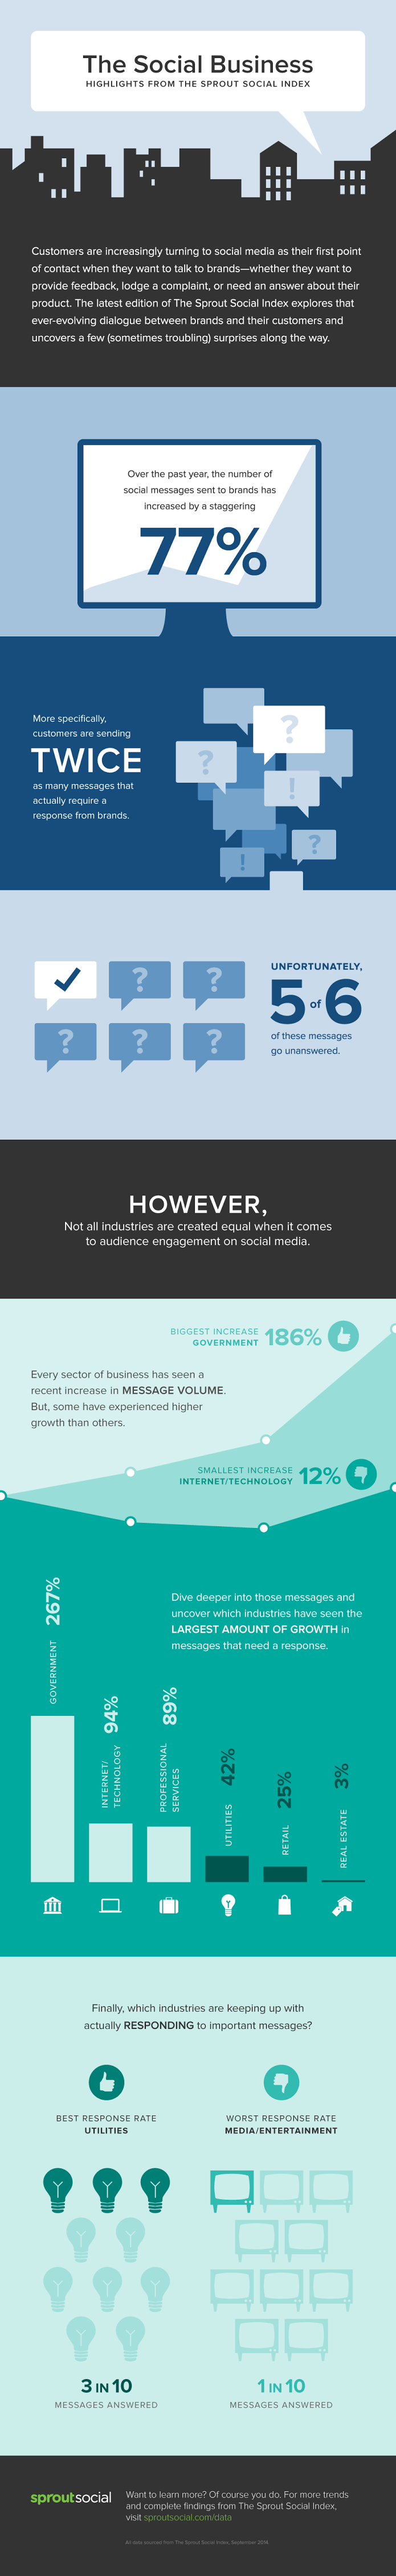 The Social Business: Highlights from the Sprout Social Index - #infographic